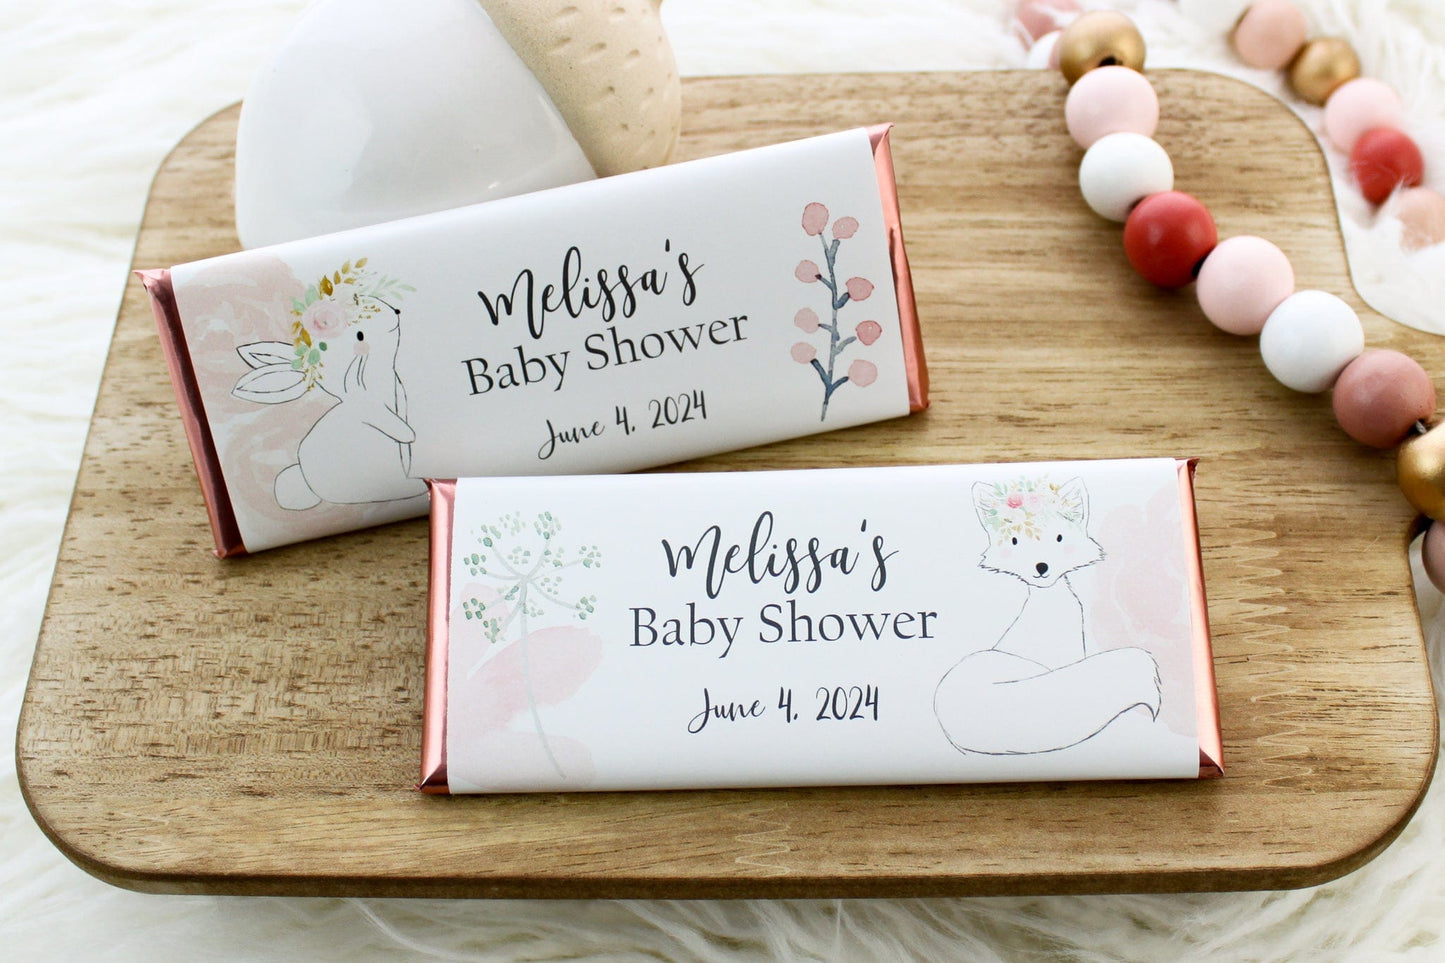 BS354 - Cute Woodland Fox with Flowers Baby Shower Candy Bar Wrappers Cute Woodland Fox with Flowers Baby Shower Candy Bar Wrappers Birth Announcement bs354